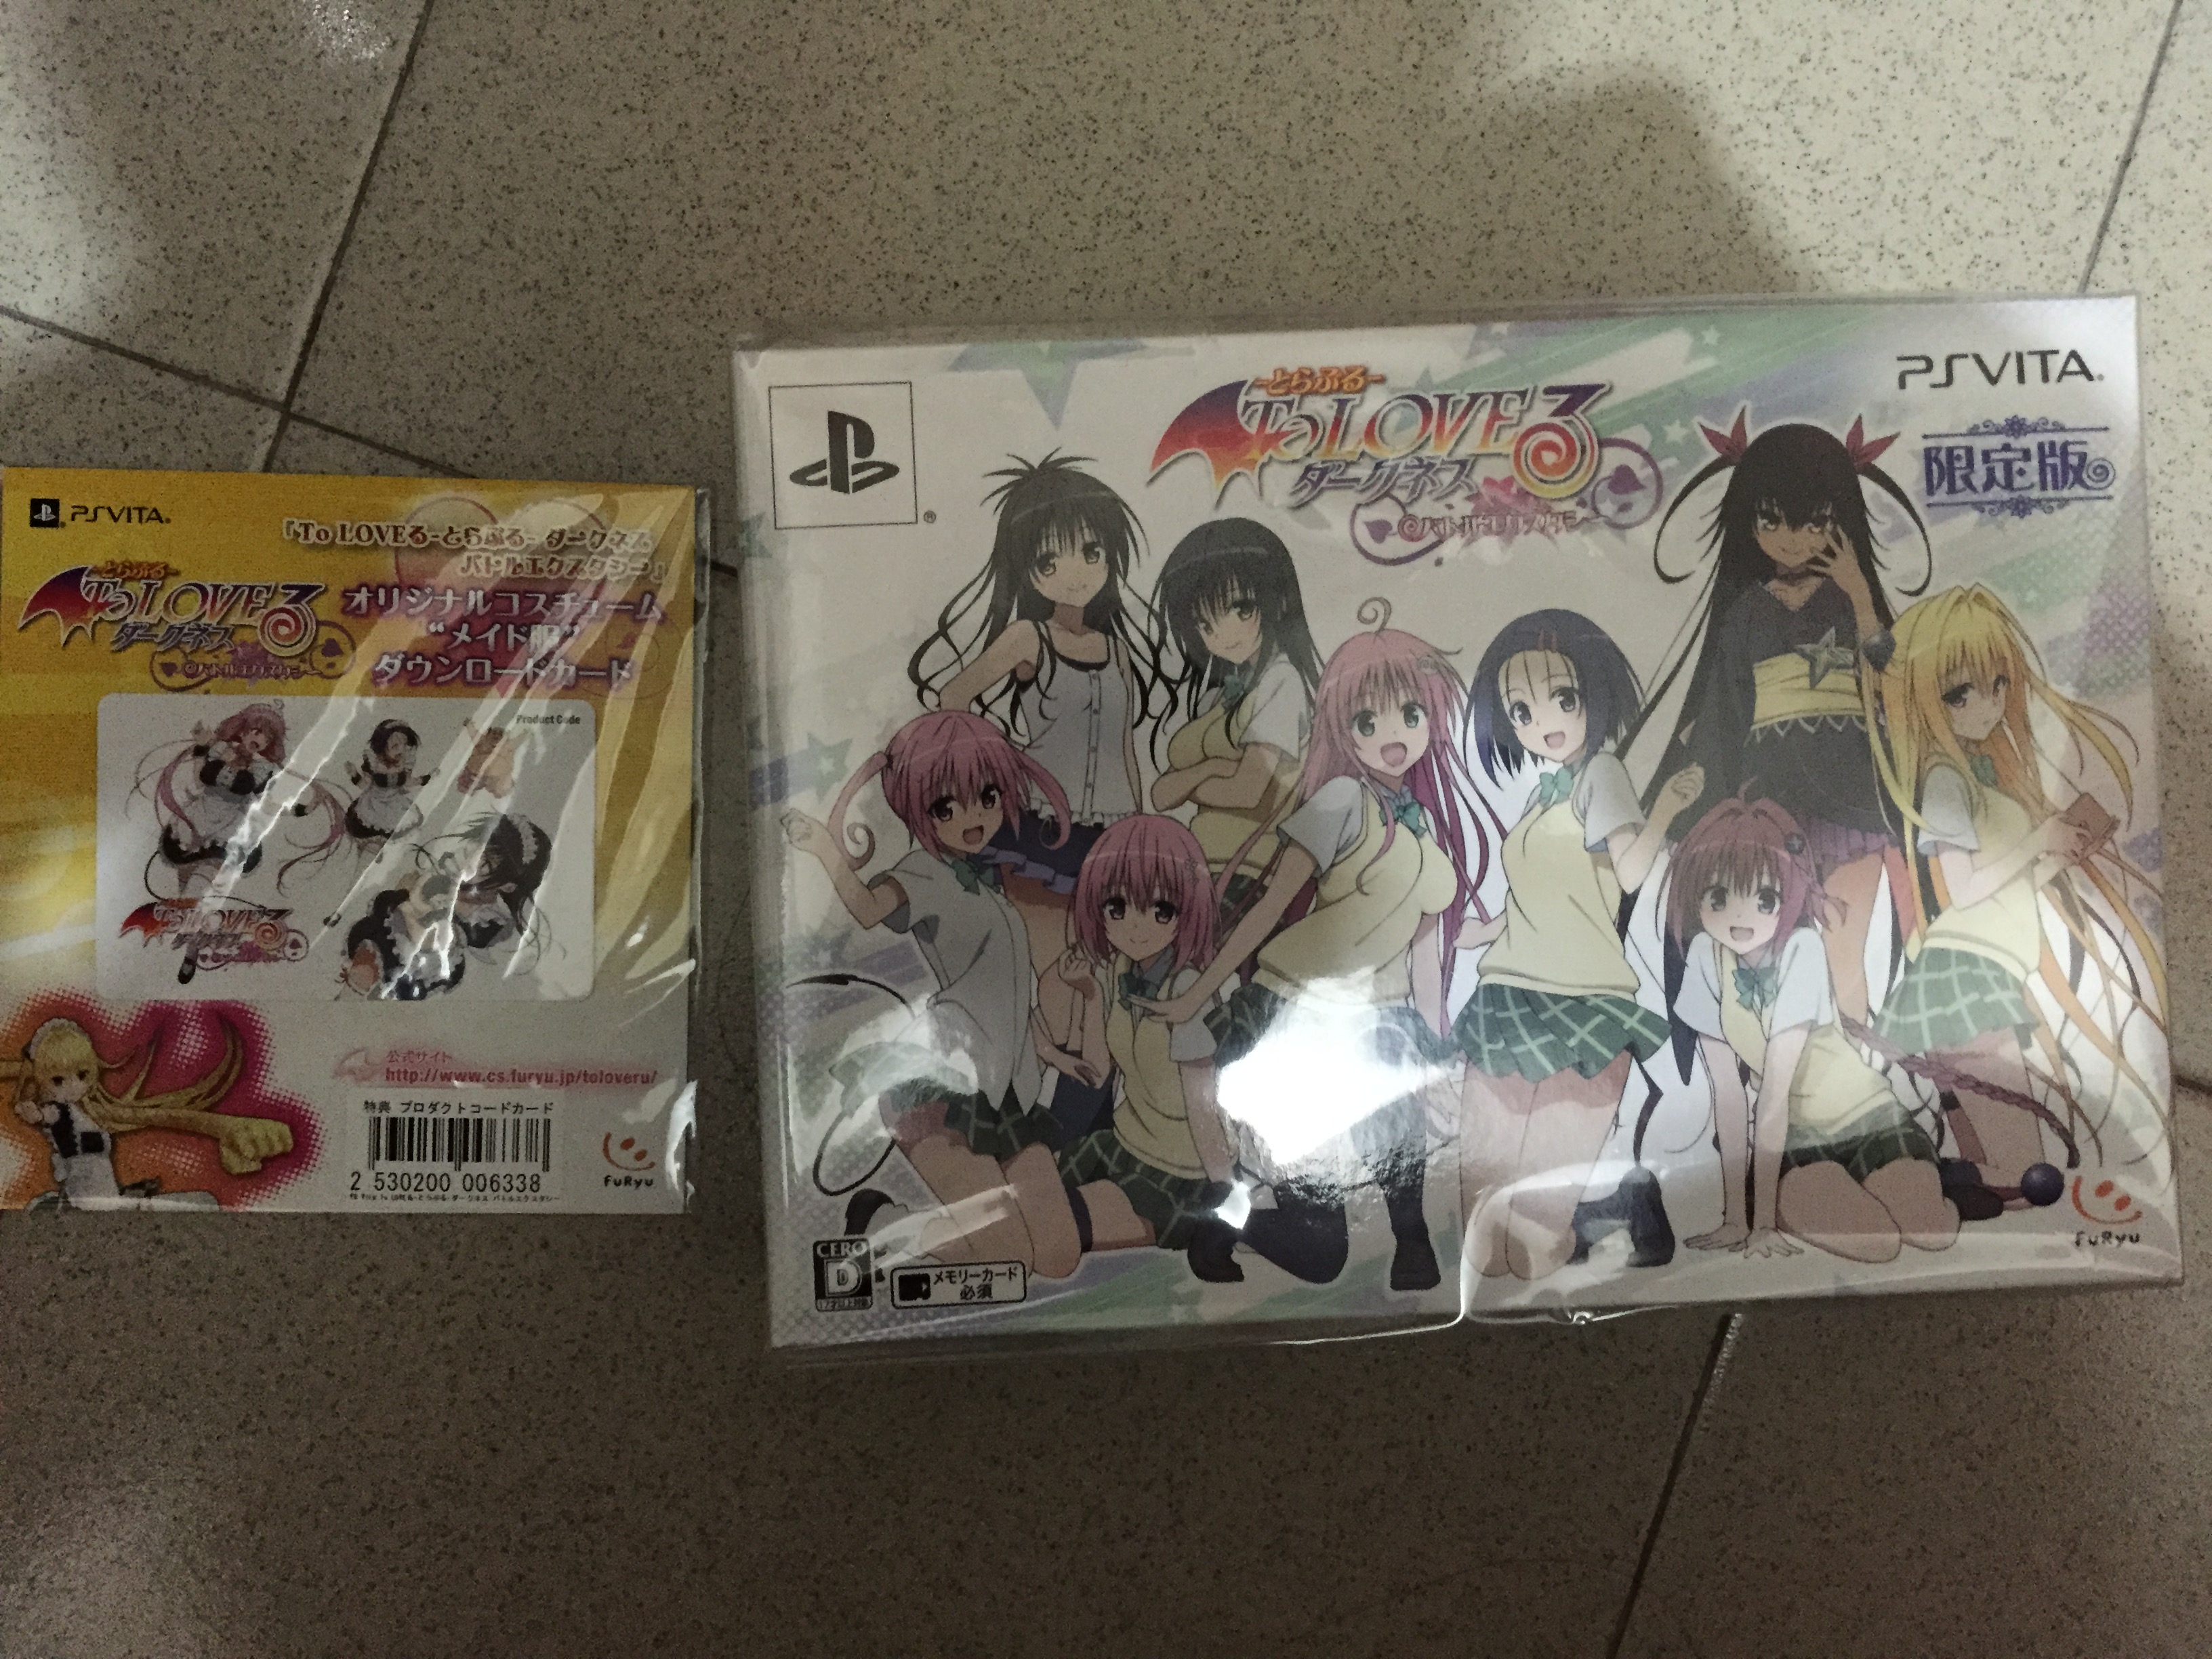 New Ps Vita To Love Ru Darkness Battle Ecstasy Limited Edition Hobbies And Toys Toys And Games